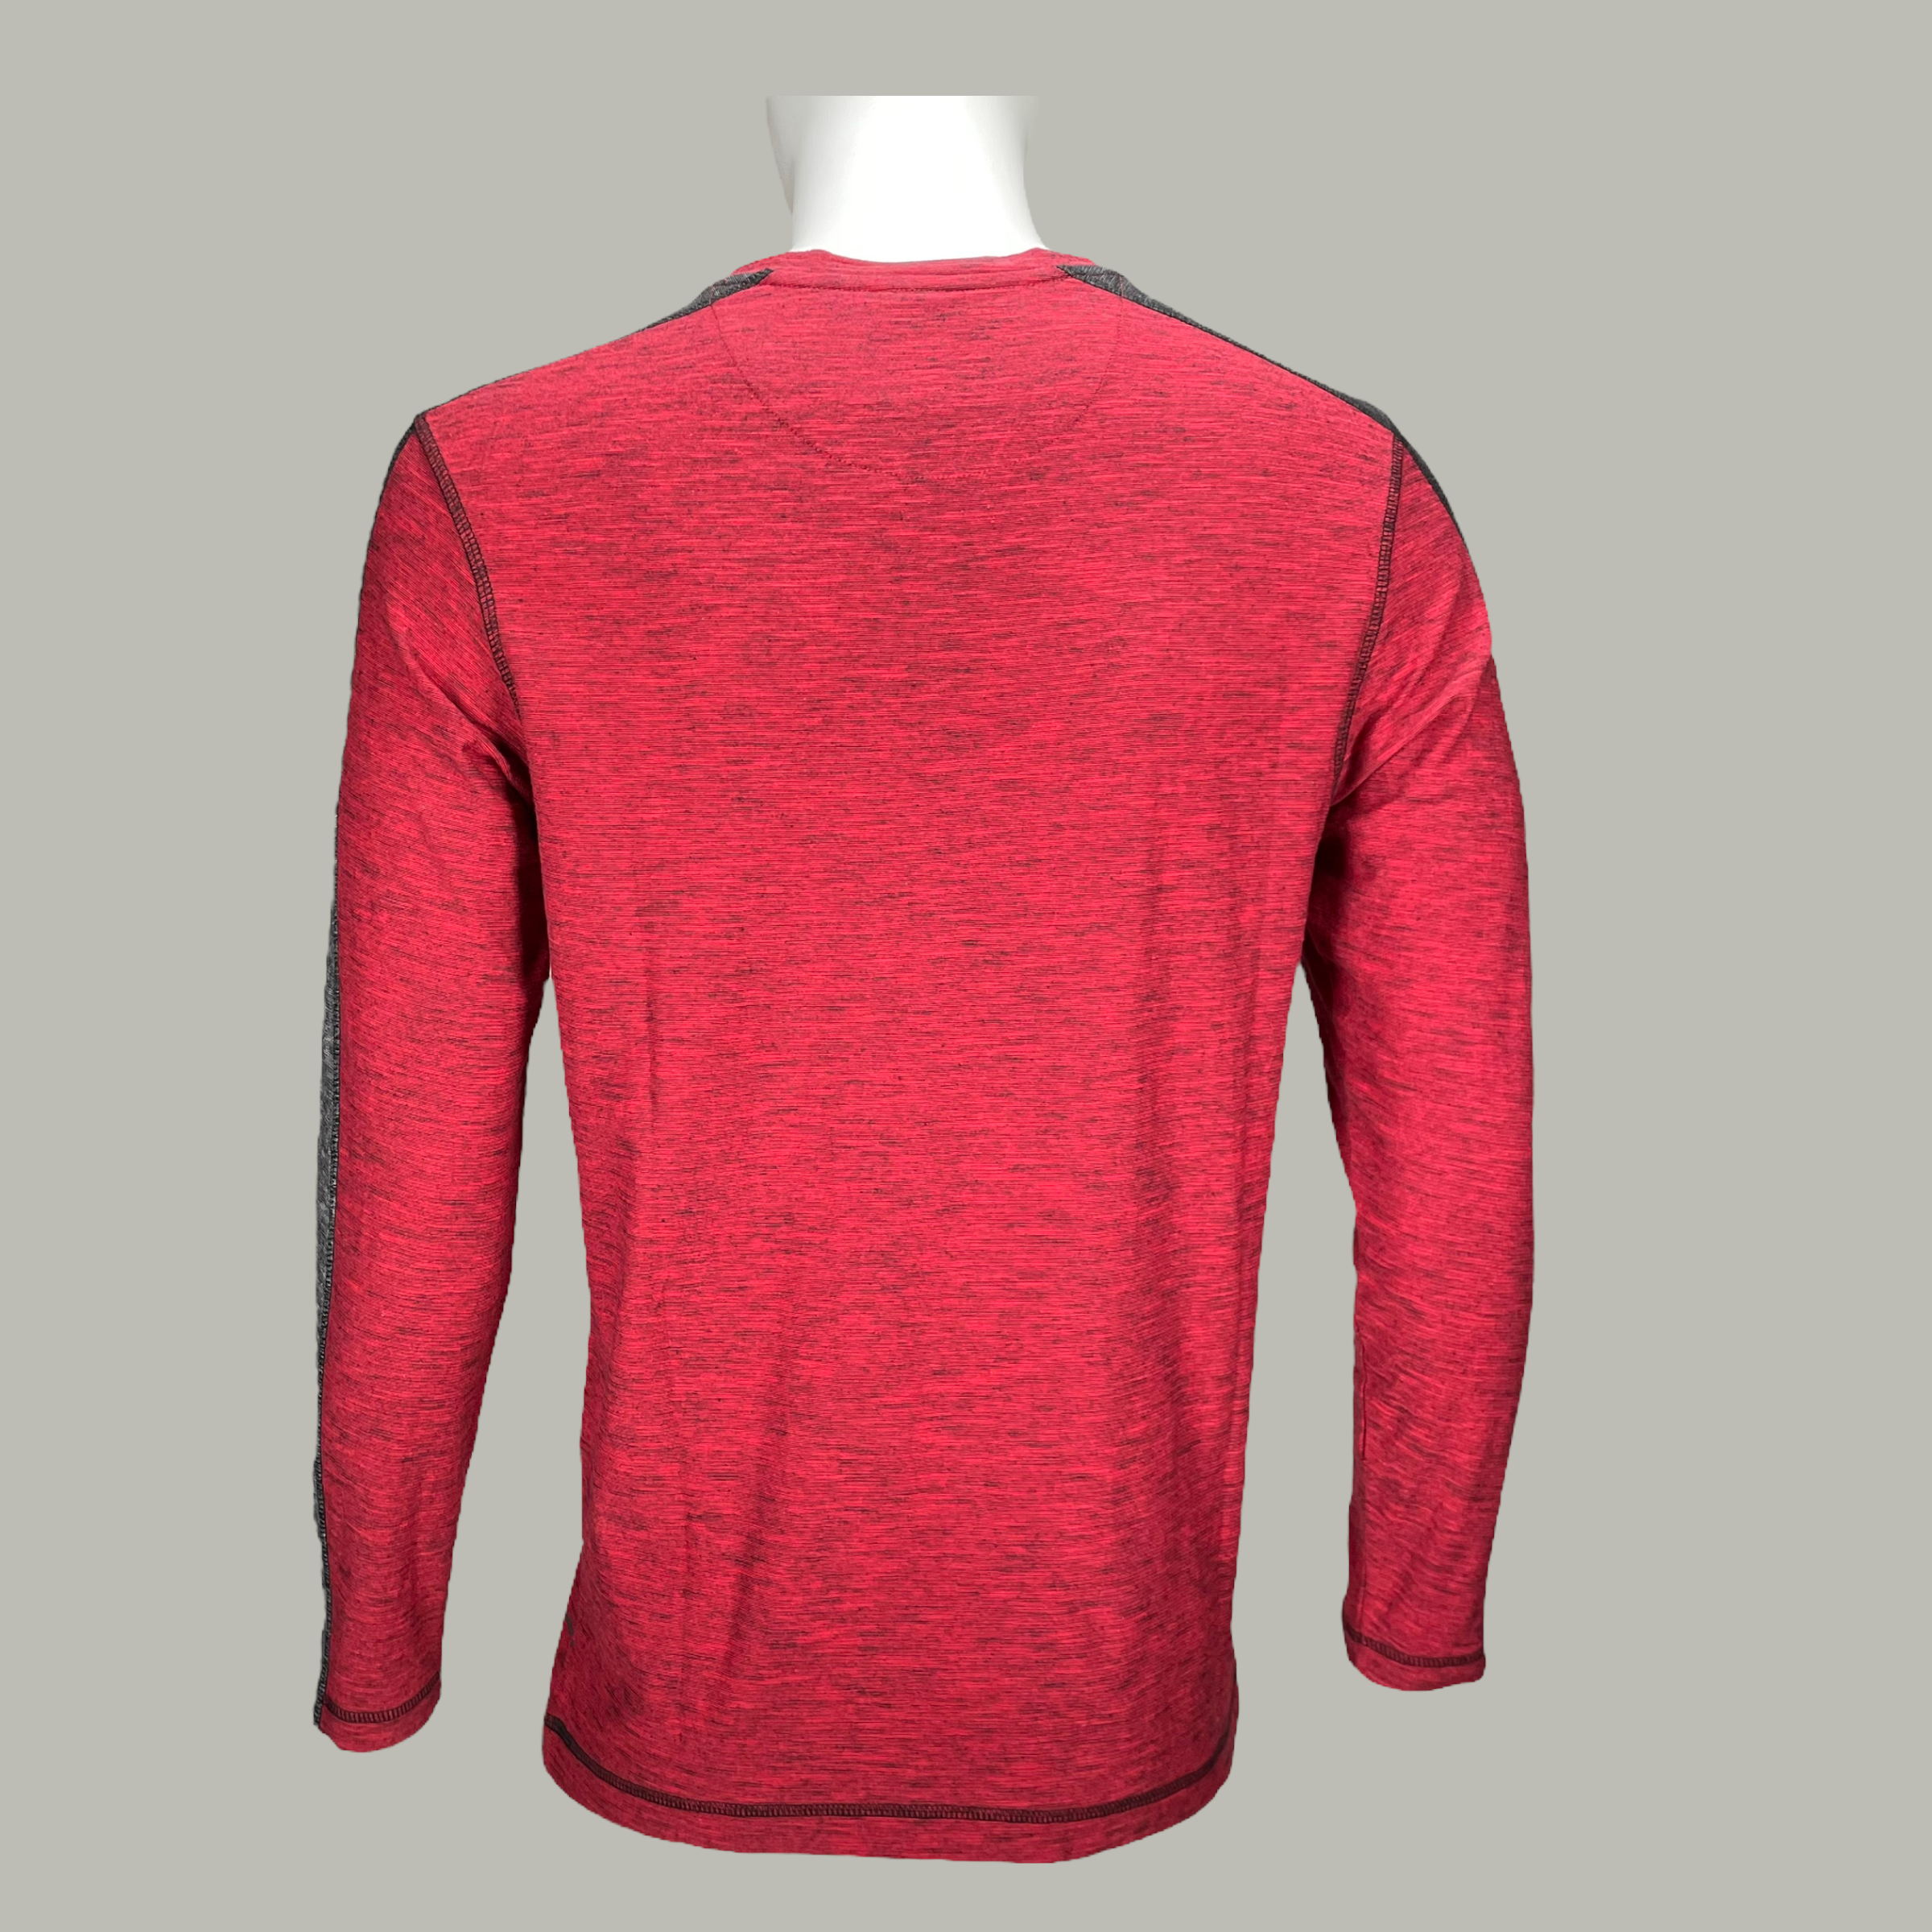 CM60-1825RED RED LONG SLEEVE TOP